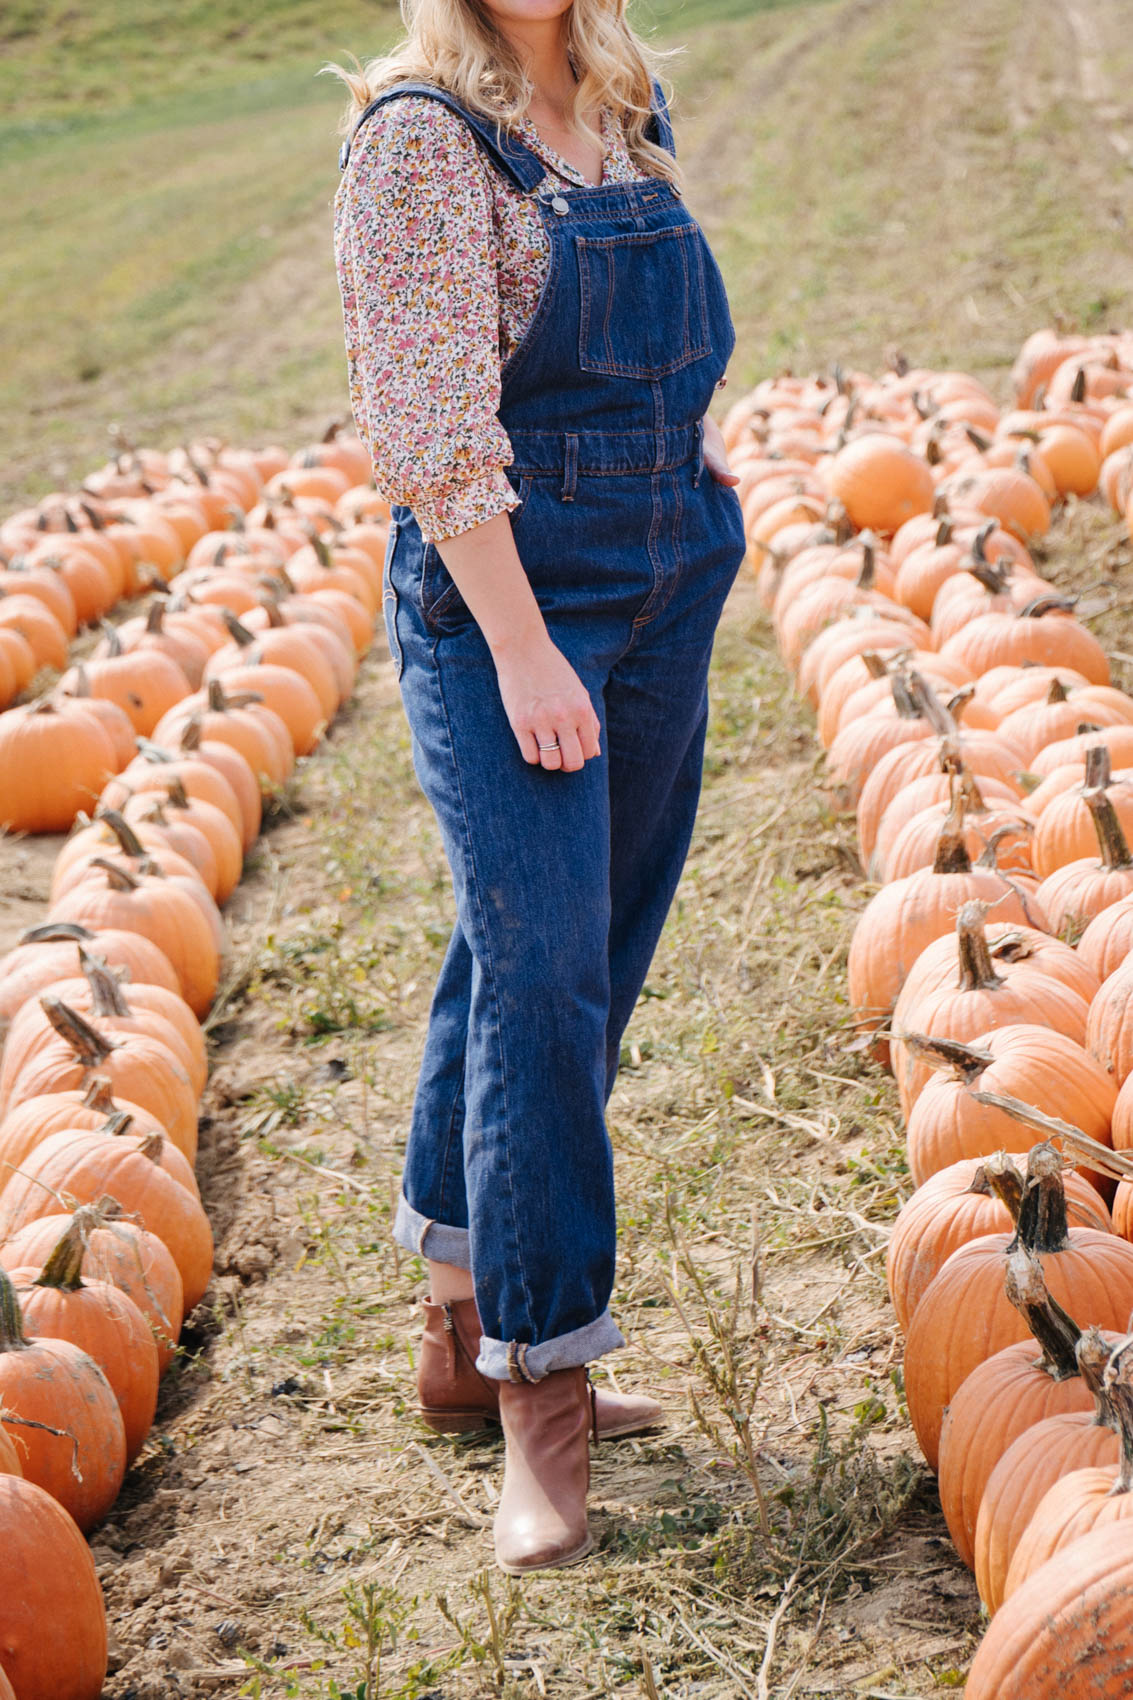 How to wear overalls | Levi's denim overalls | overalls outfit | pumpkin patch photoshoot 